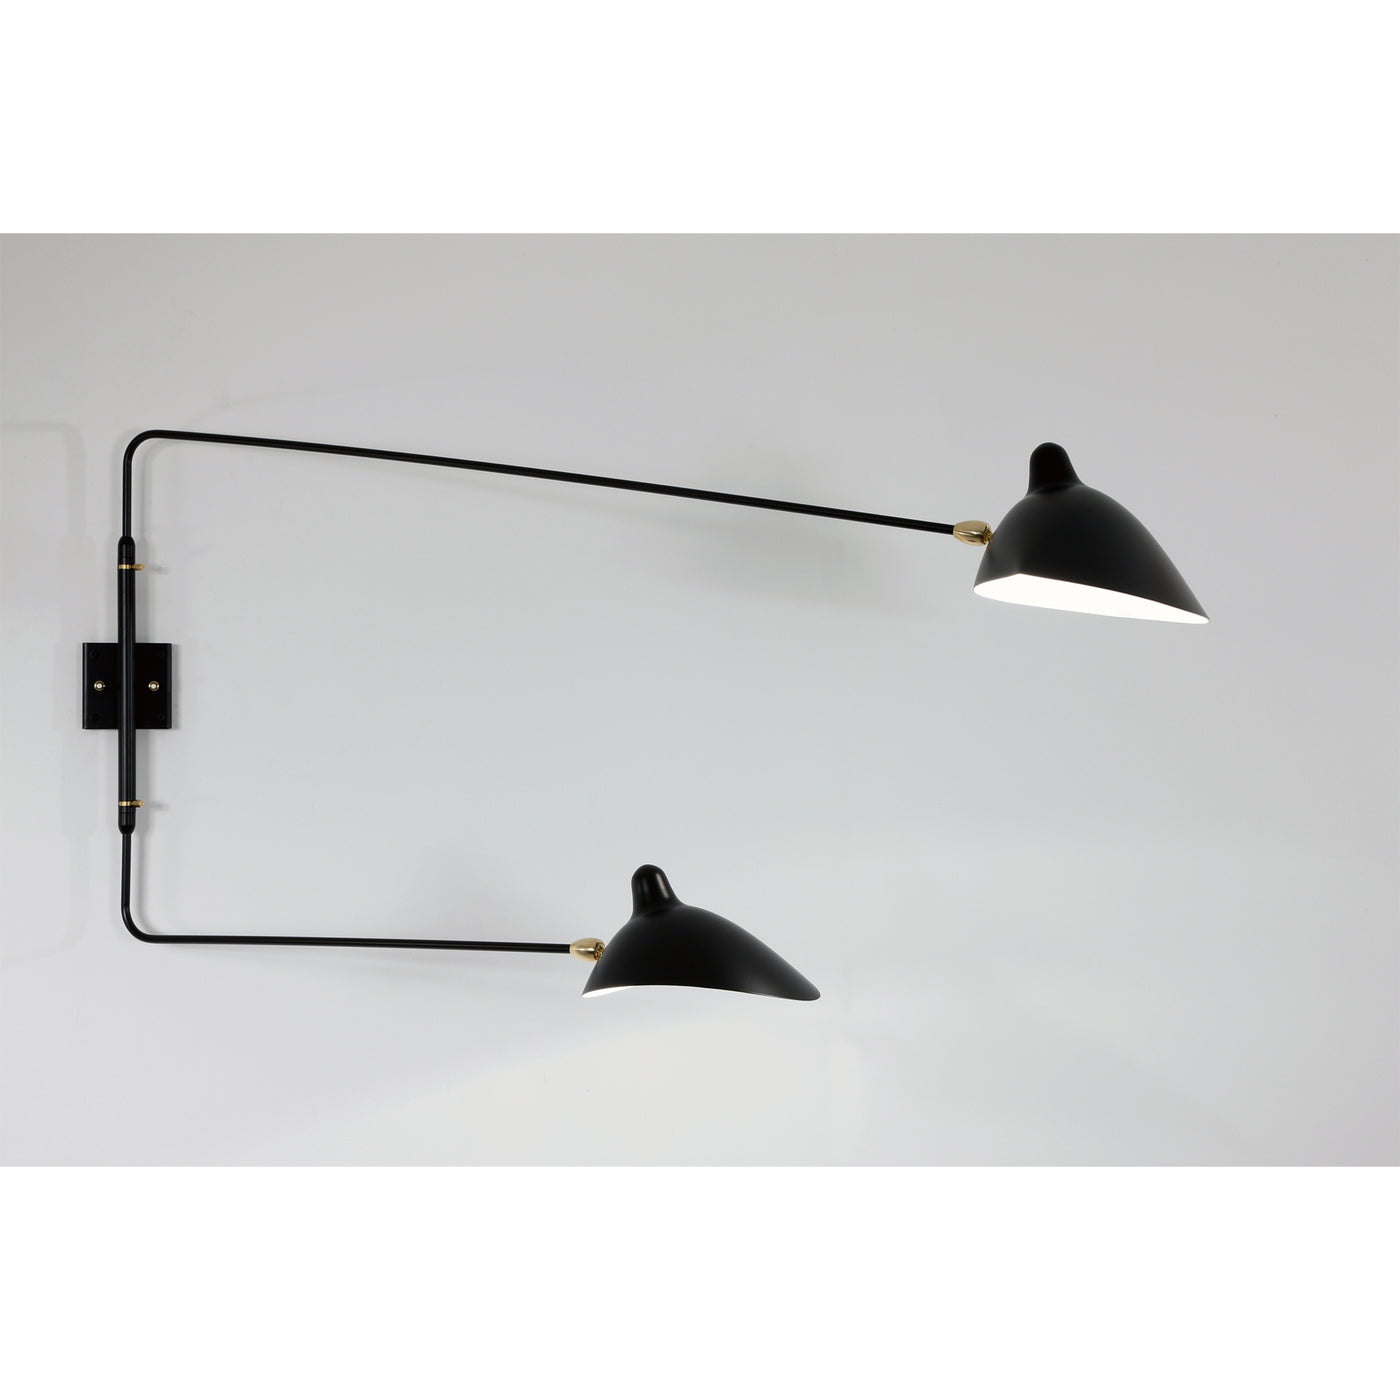 TWO STRAIGHT ARMS wall light (1954)